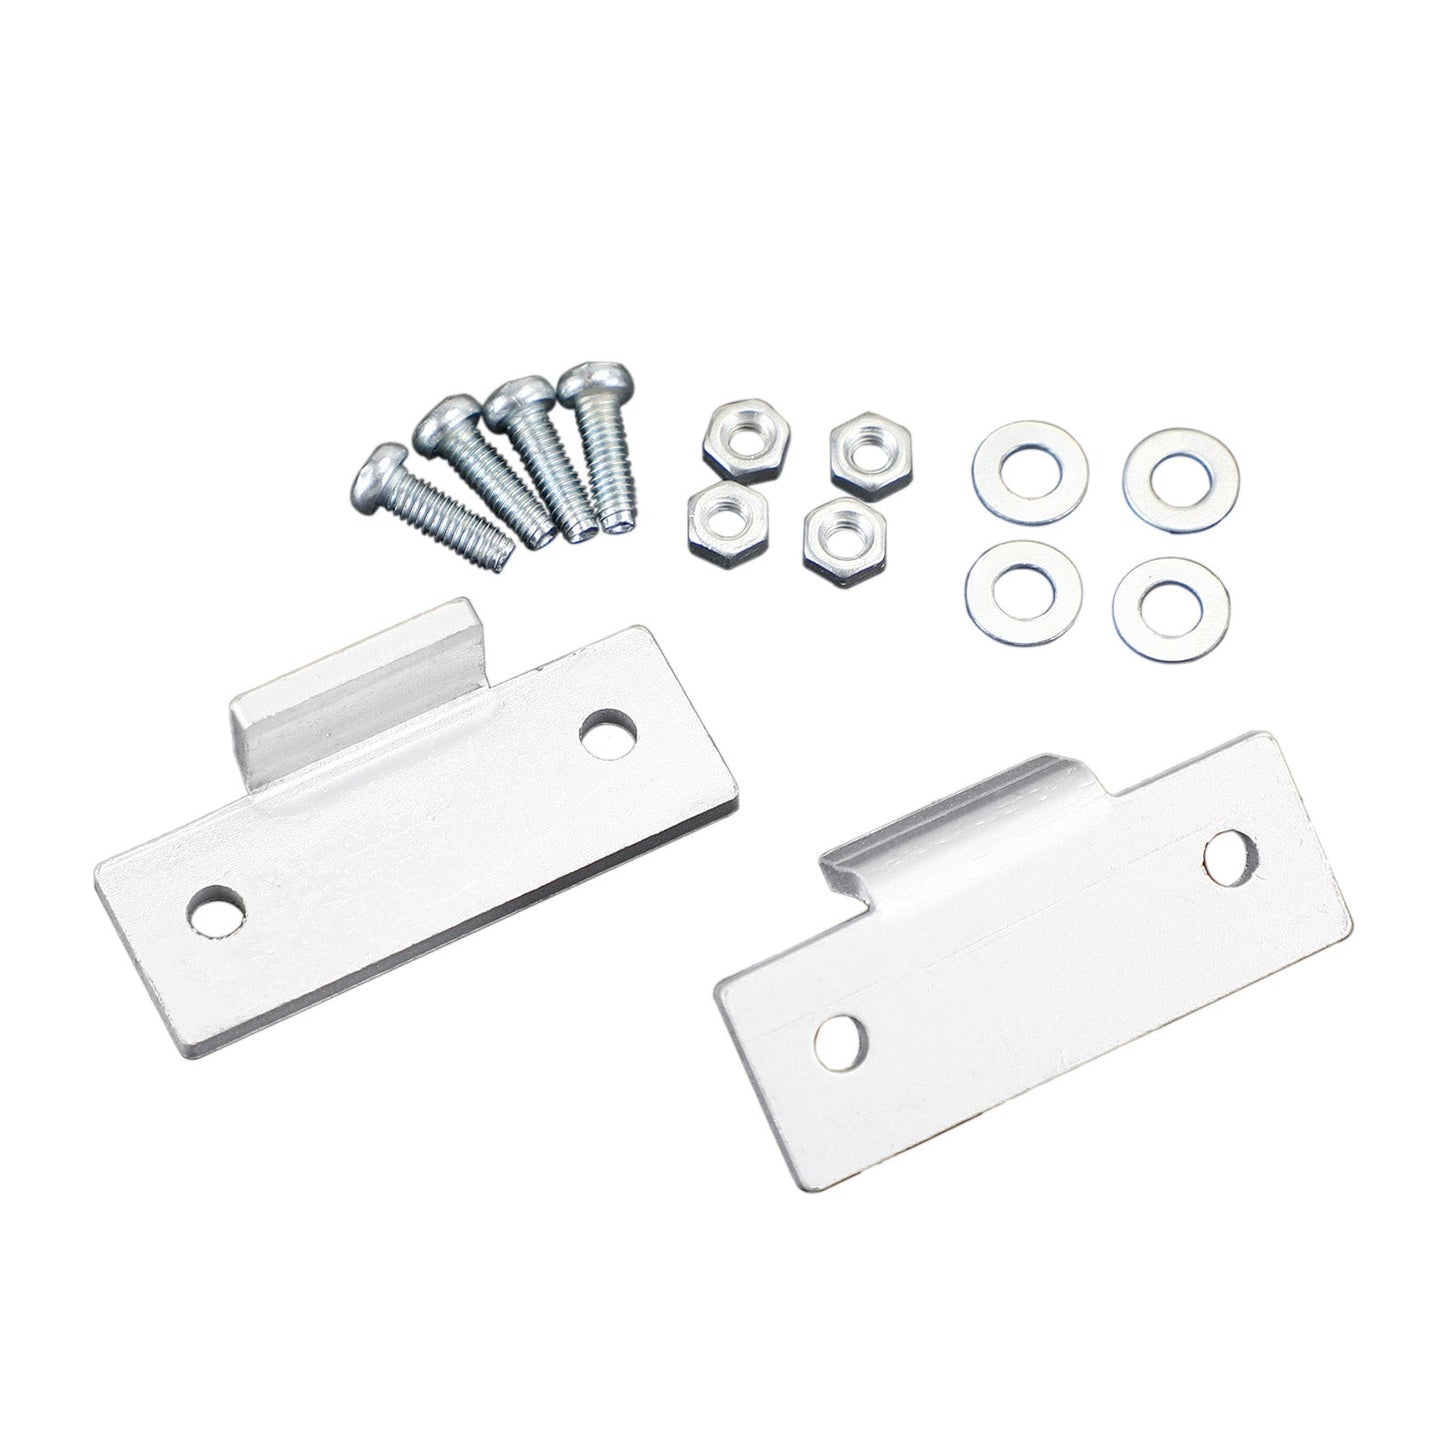 Two Dust Cover Fix Repair Brackets Hinge For SL-Q2 Q3 3200 Q200 Others Turntable